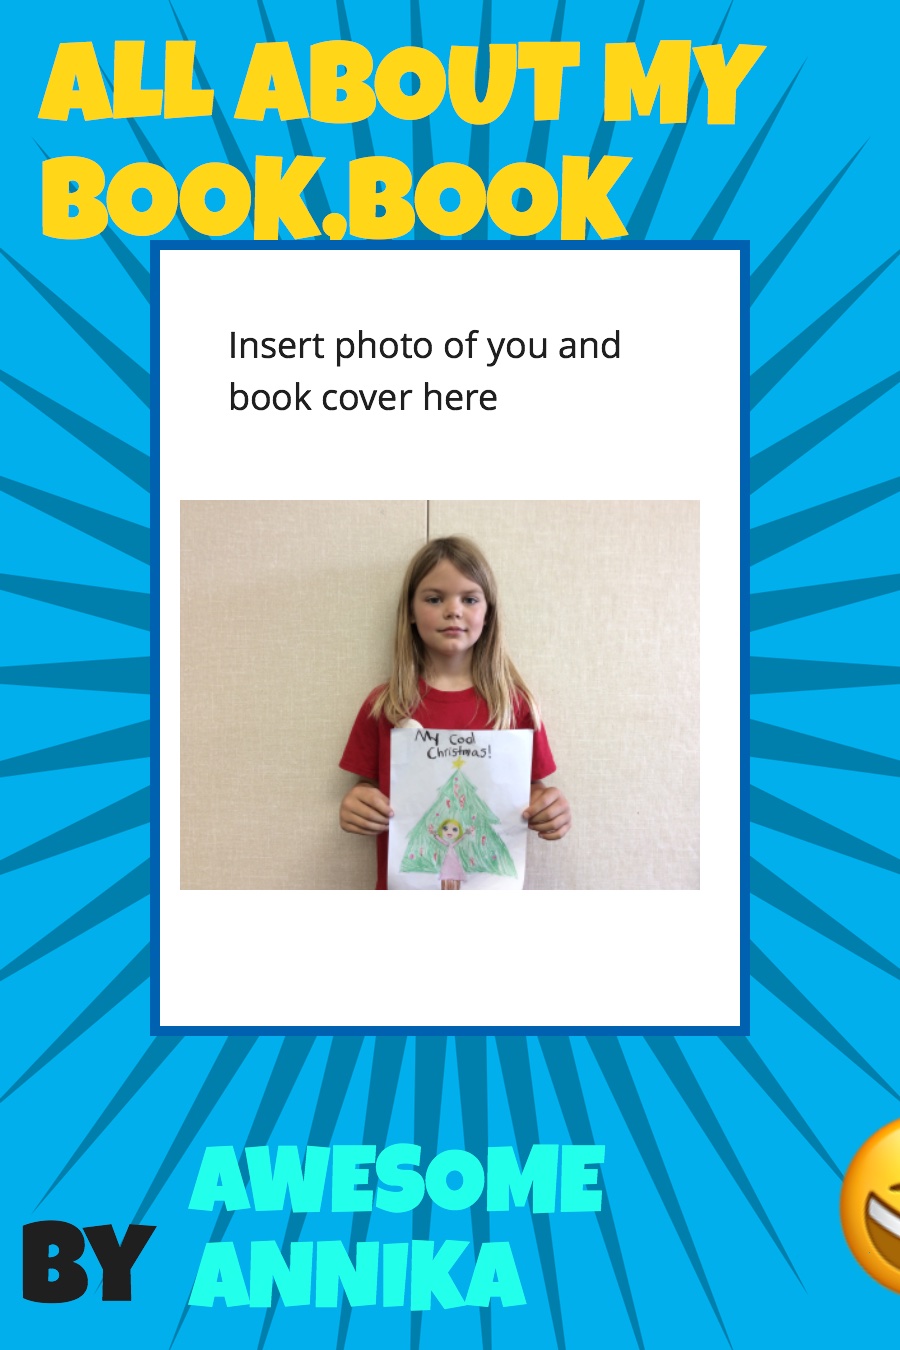 All About My Book by Annika H